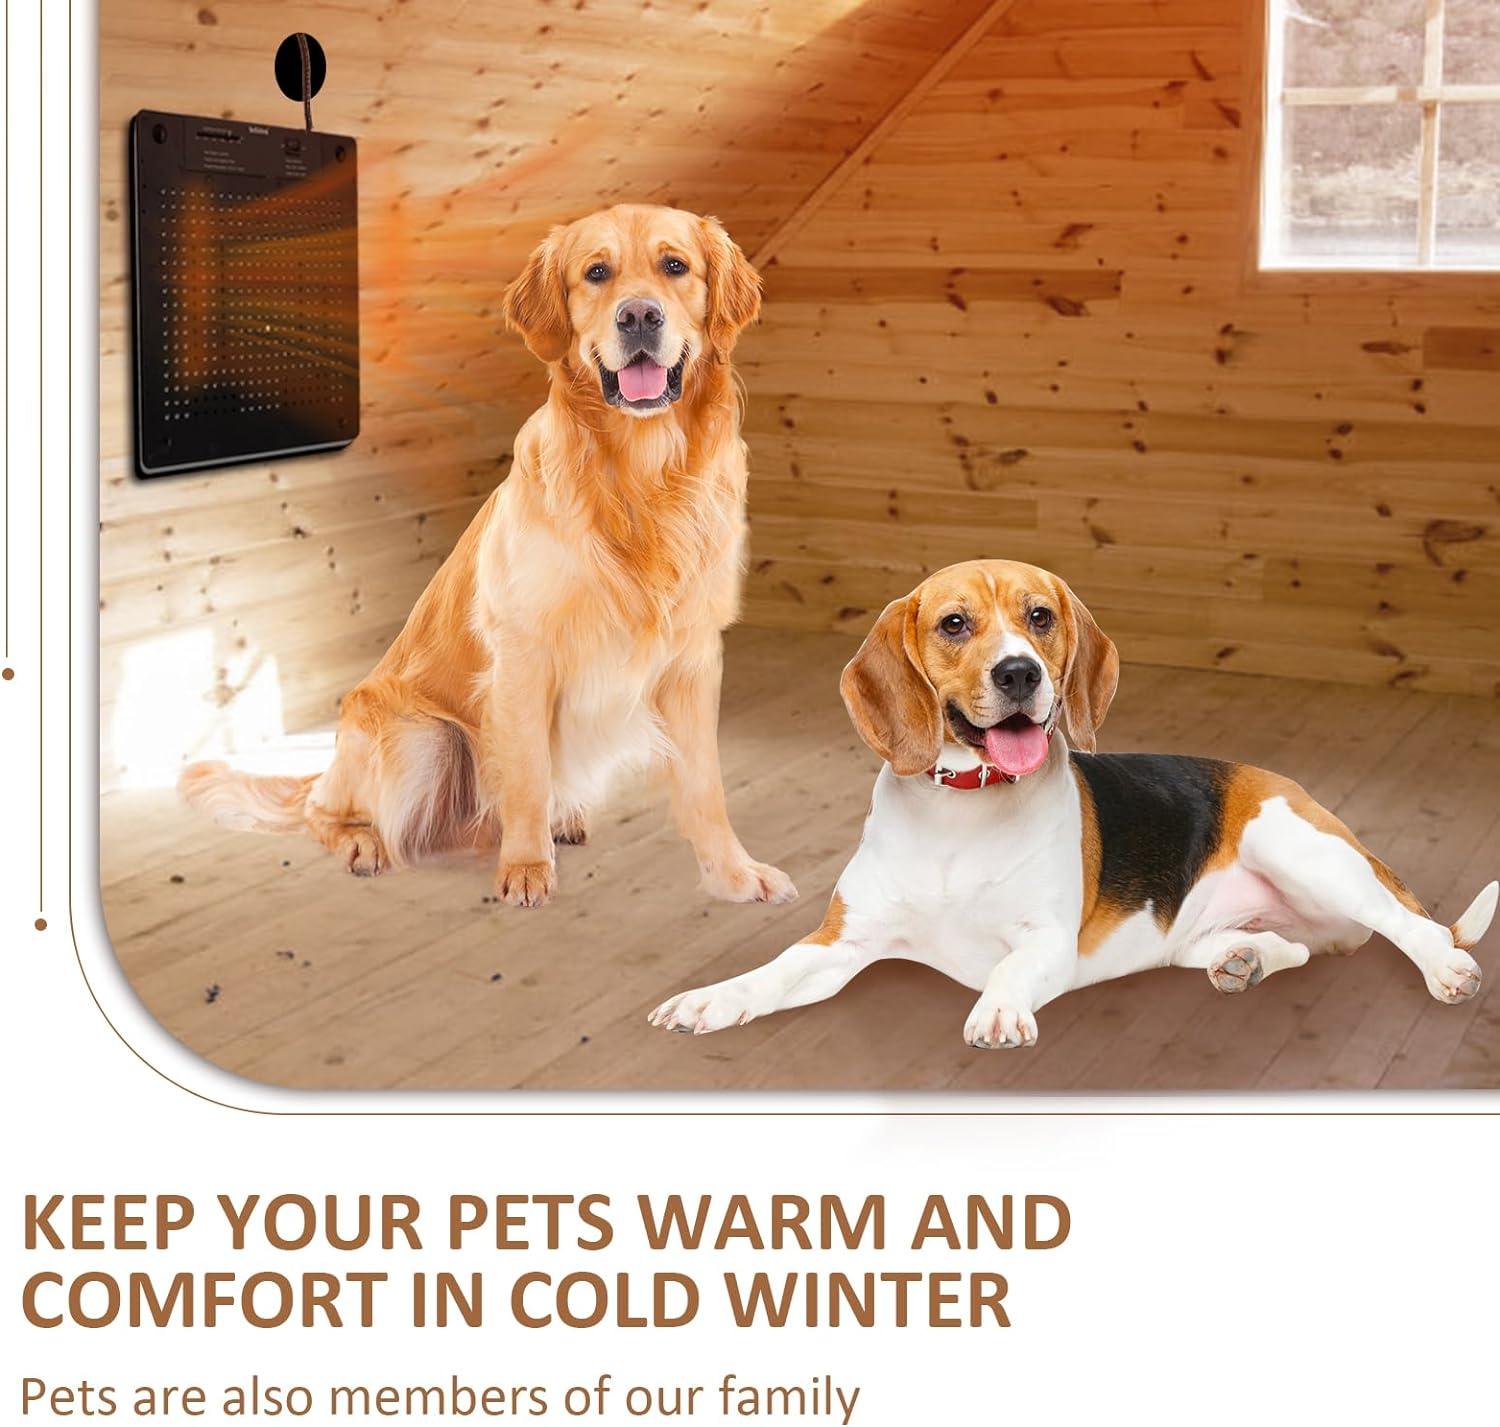 Briidea 140W Dog House Heater, Adjustable Temperature (40℉-140℉), Anti-Chew Cord, Ultra-Quiet & Slim Design, Perfect for Chicken Coops, Rabbit Cages, Cat Houses, Ensure Your Pets Stay Warm in Winter - briidea